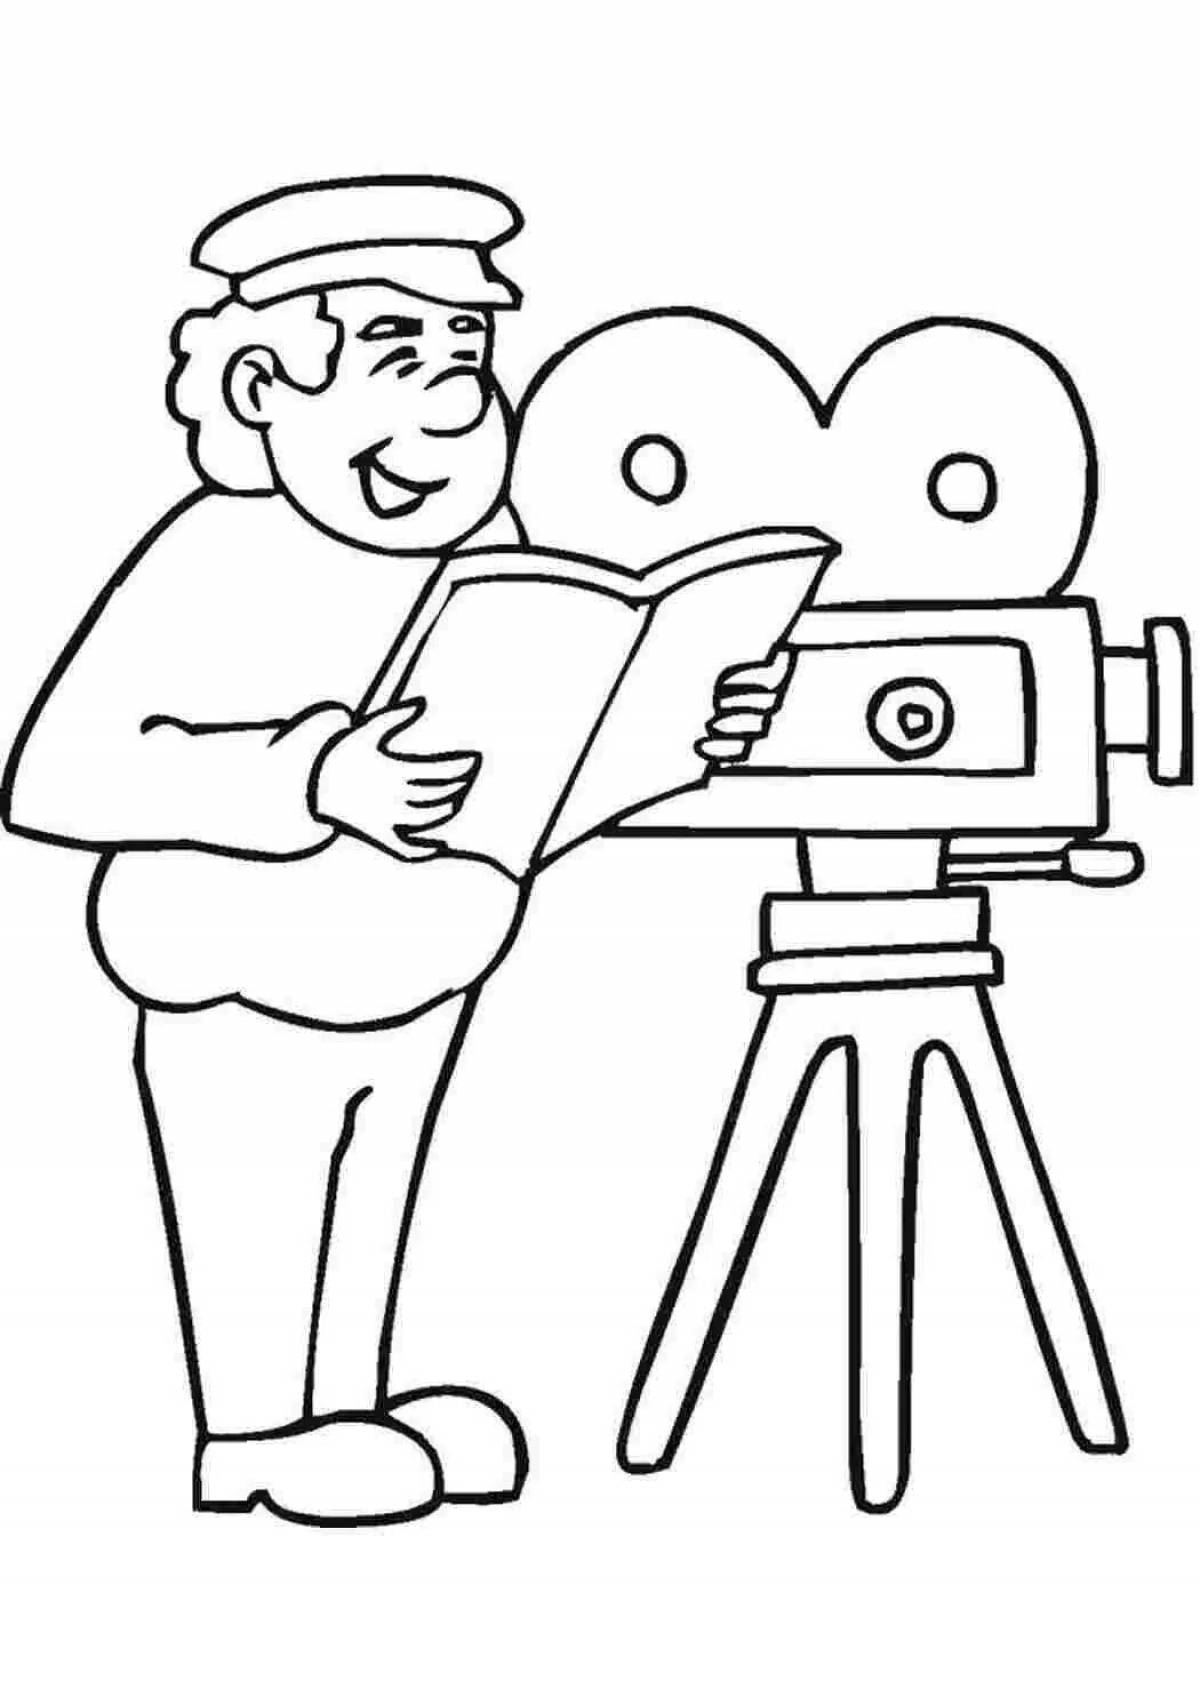 Coloring pages of professions for schoolchildren